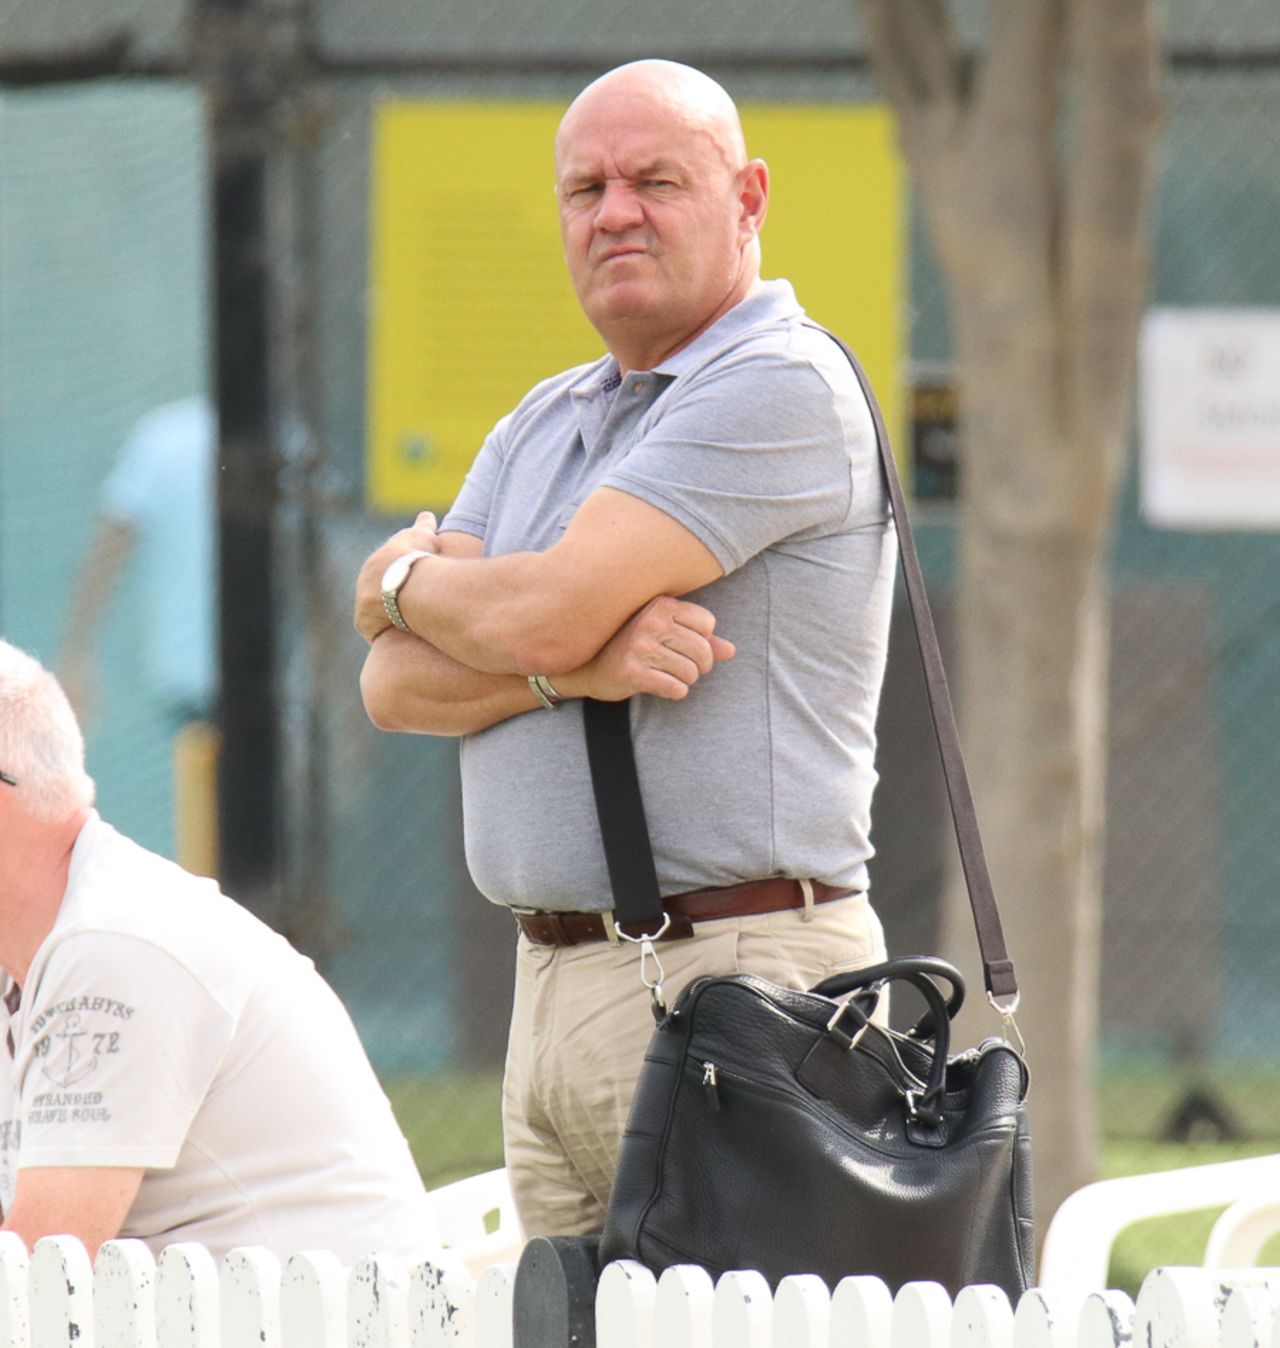 Cricket PNG chief executive Greg Campbell looks on anxiously as his team concedes a big total, Hong Kong v Papua New Guinea, 2nd ODI, 2015-17 WCL Championship, Dubai, December 8, 2017